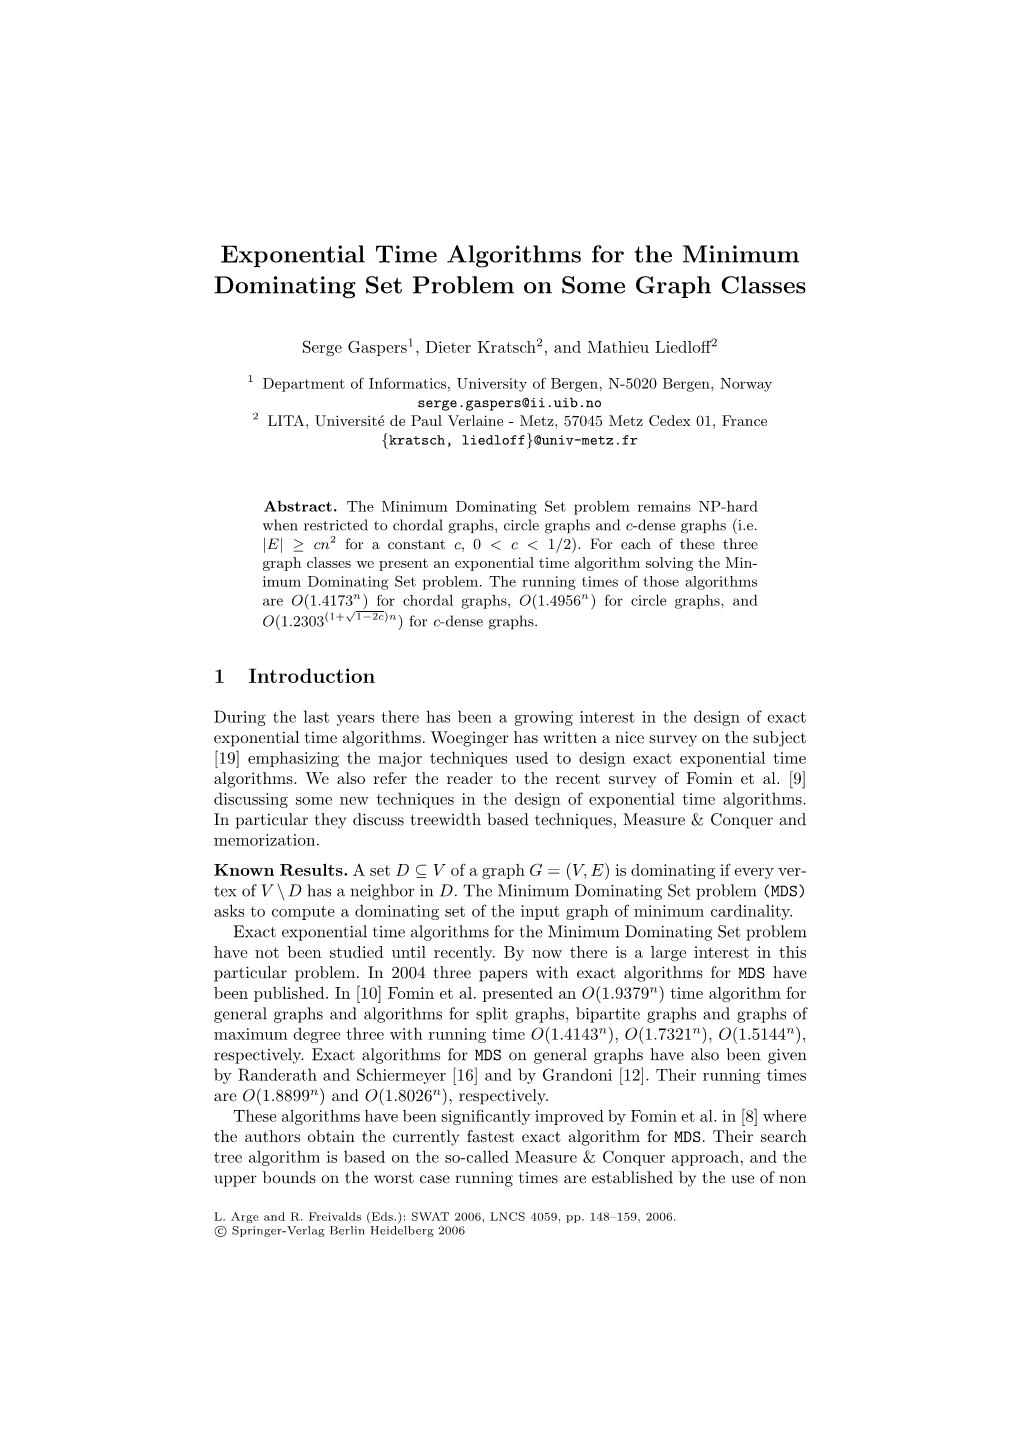 Exponential Time Algorithms for the Minimum Dominating Set Problem on Some Graph Classes